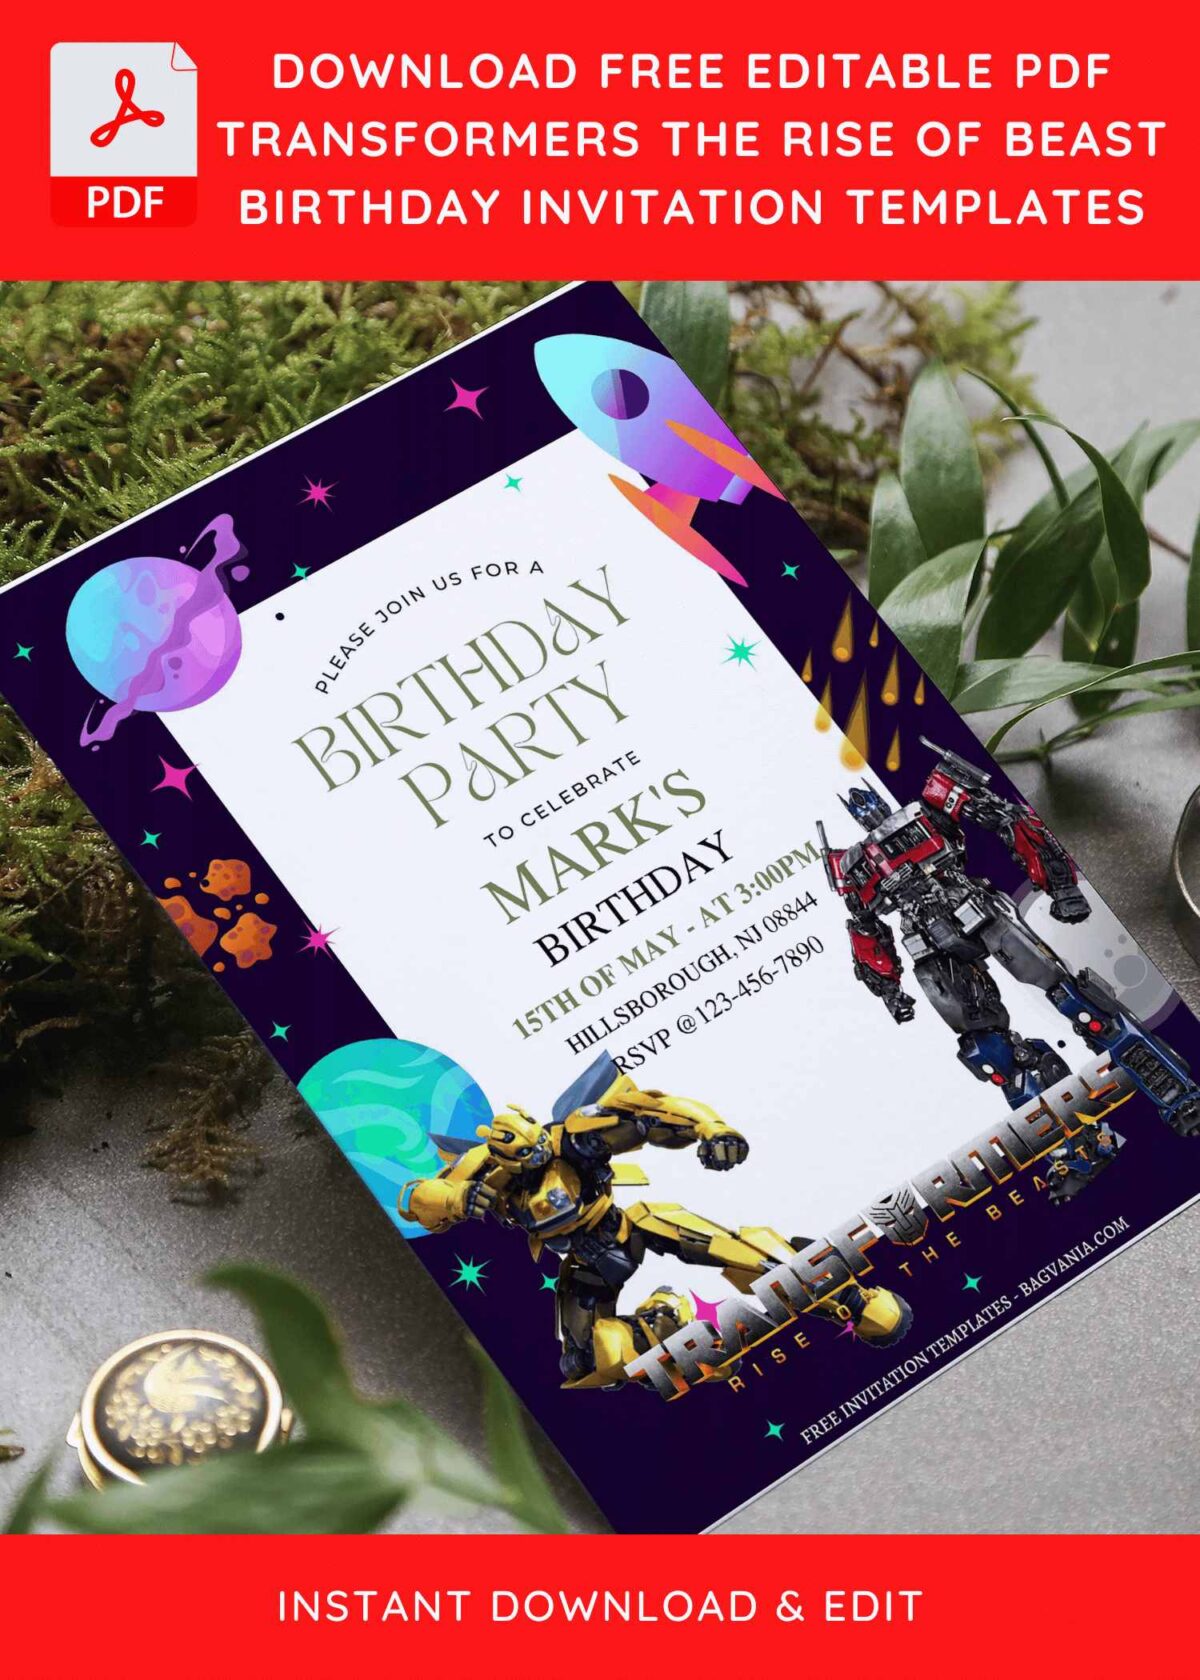 (Free Editable PDF) Epic Transformers Boys Birthday Invitation Templates with Bumble Bee